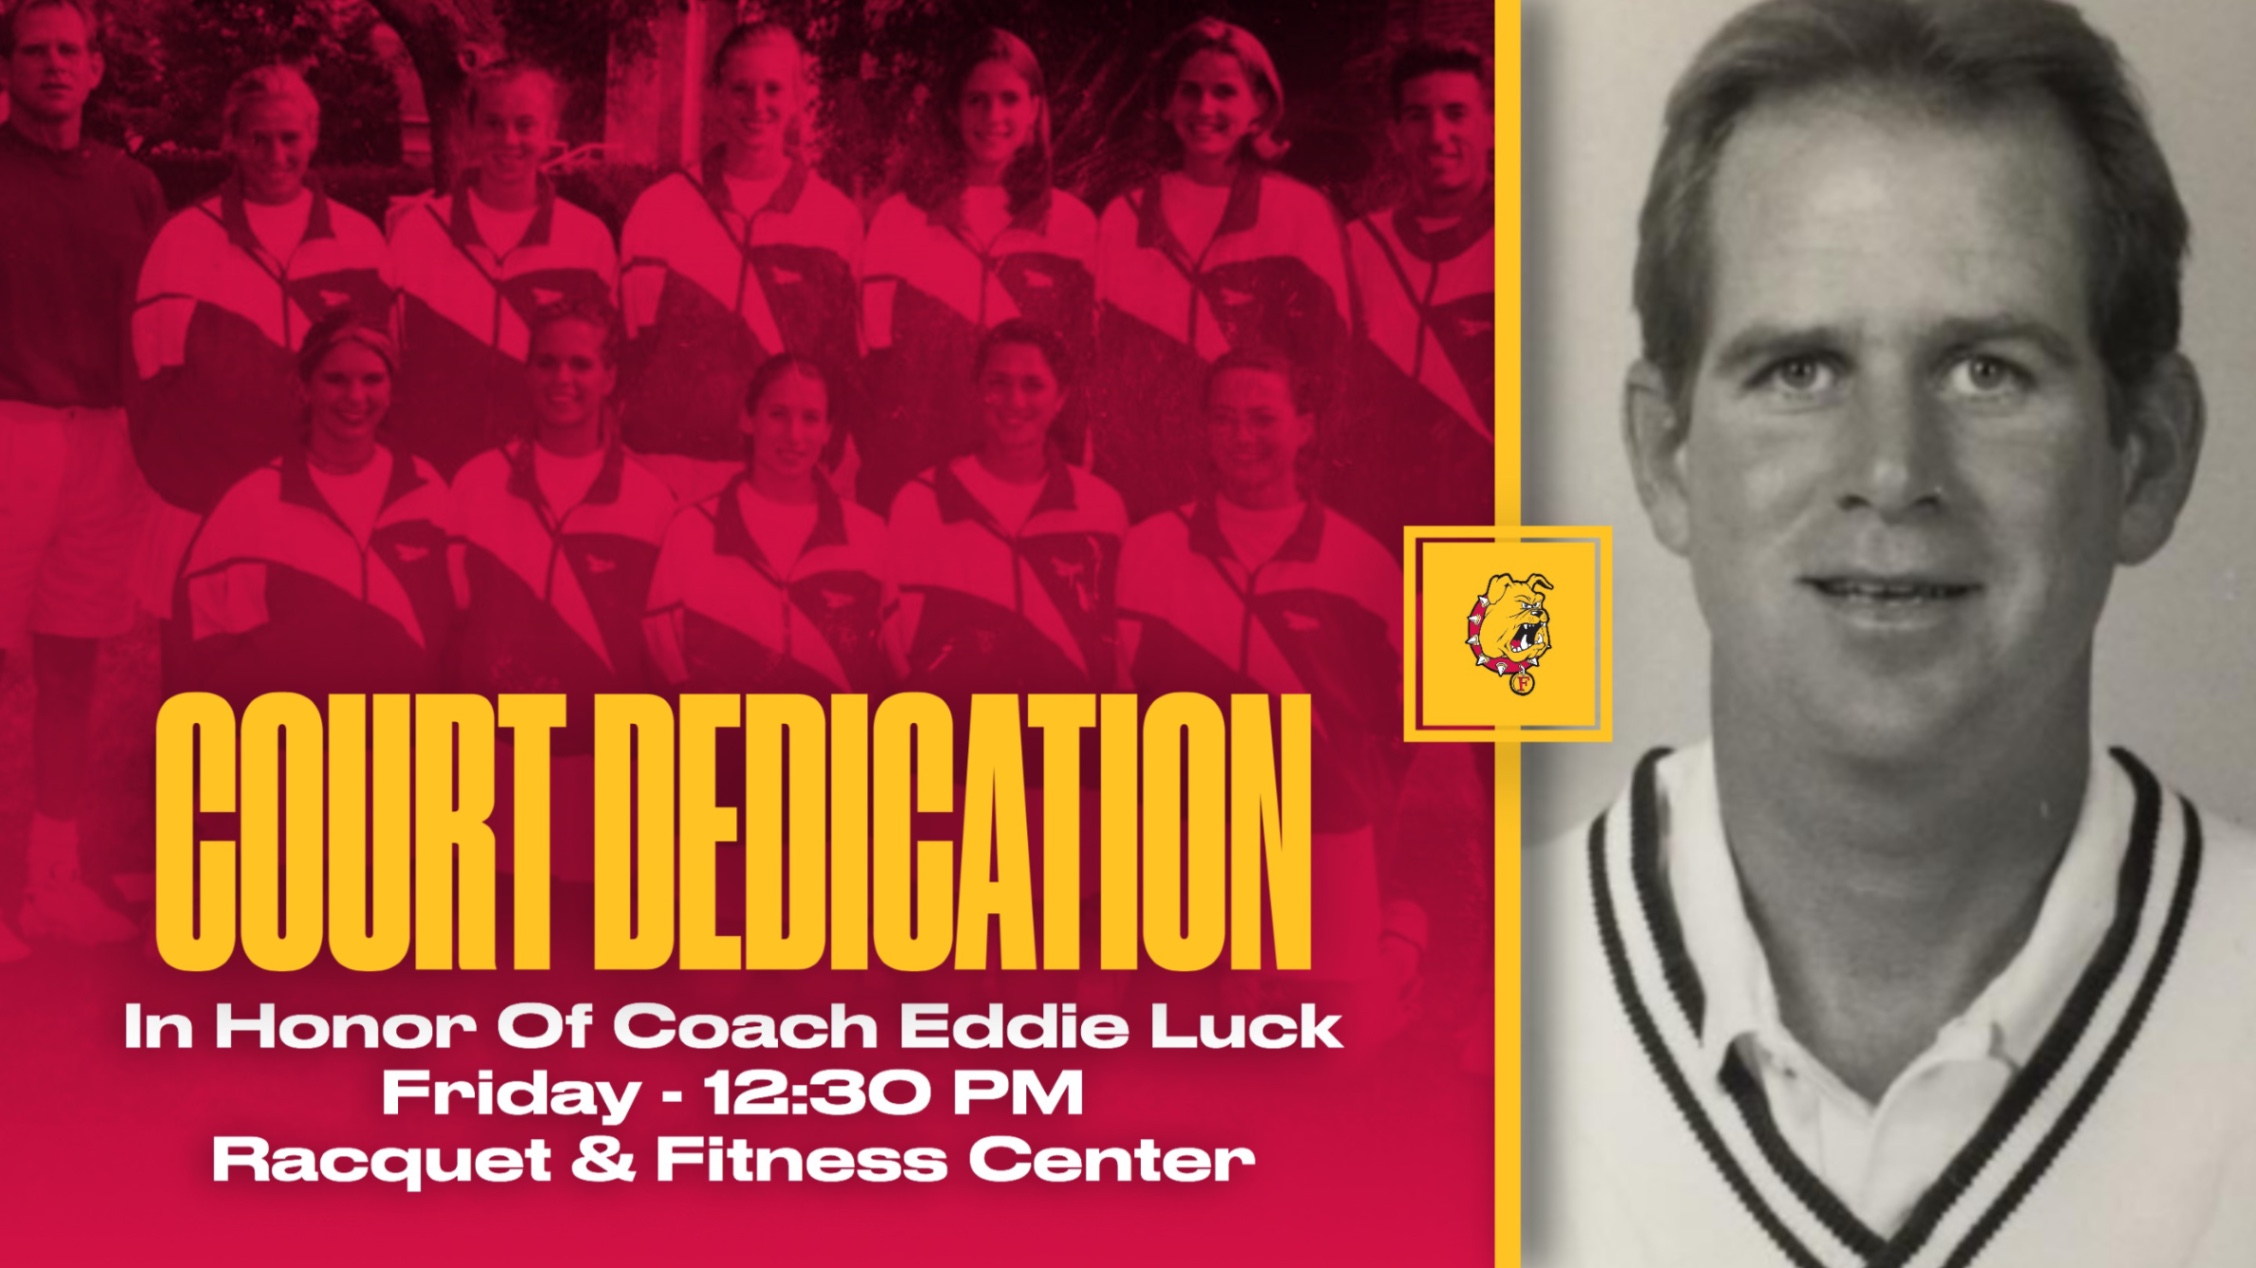 Ferris State Tennis To Hold Special Court Dedication Friday In Honor Of Former Coach Eddie Luck